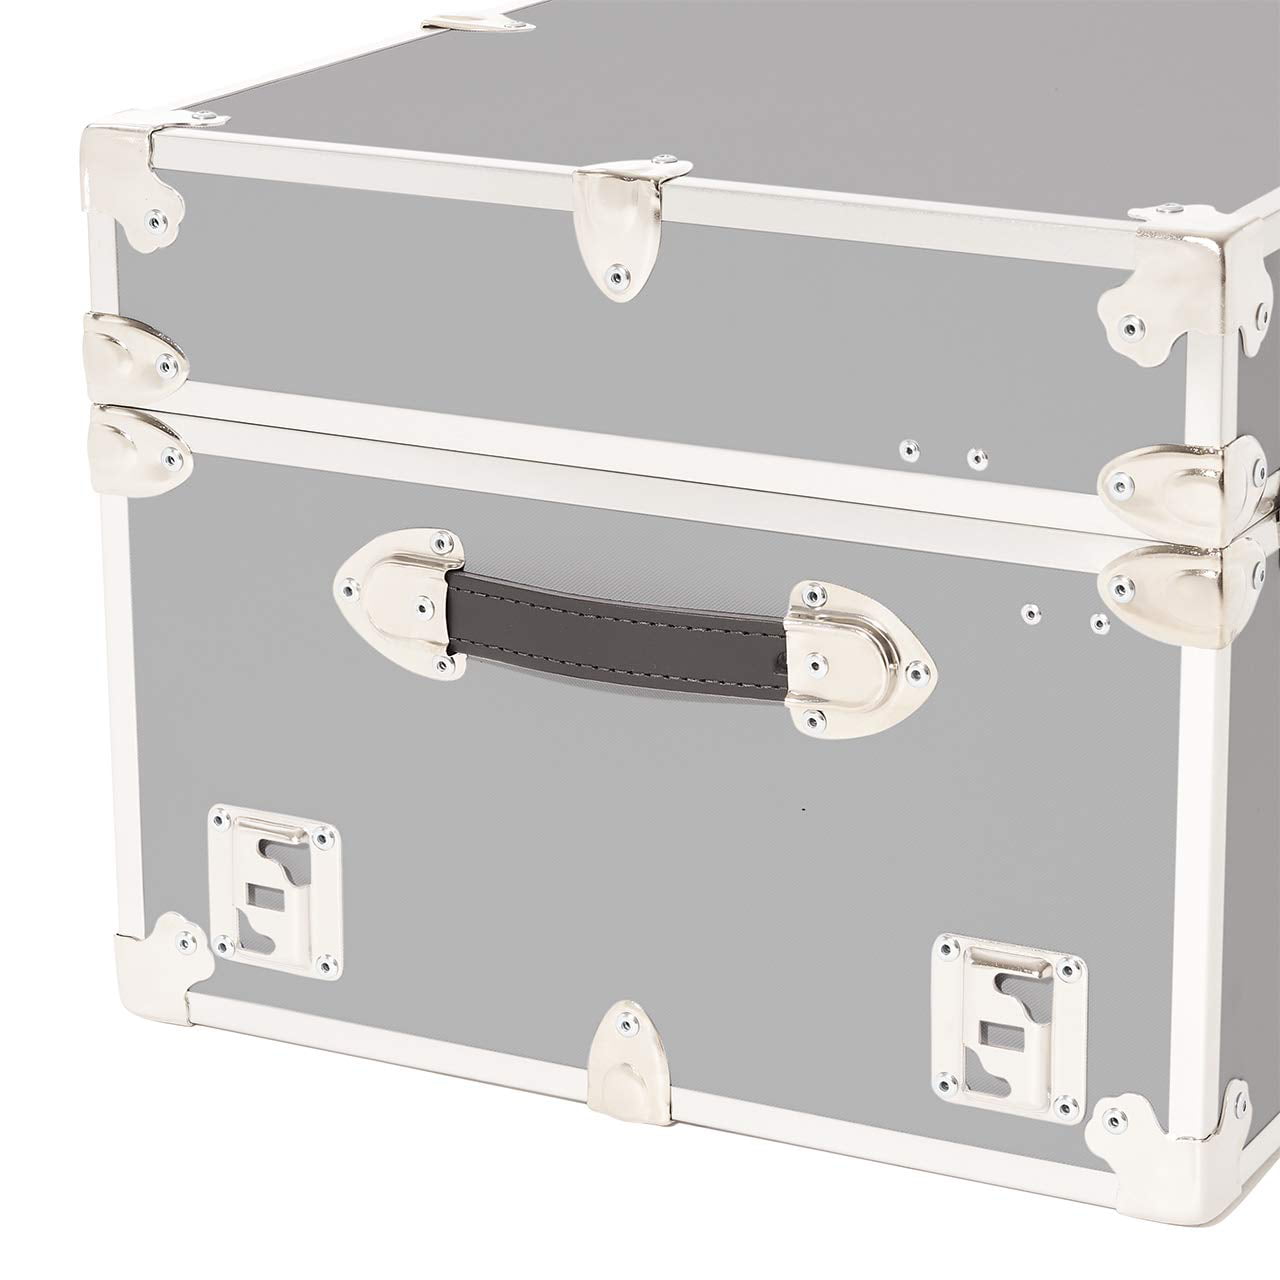 Rhino Trunk & Case  Manufacturer of Quality Storage Trunks & Cases